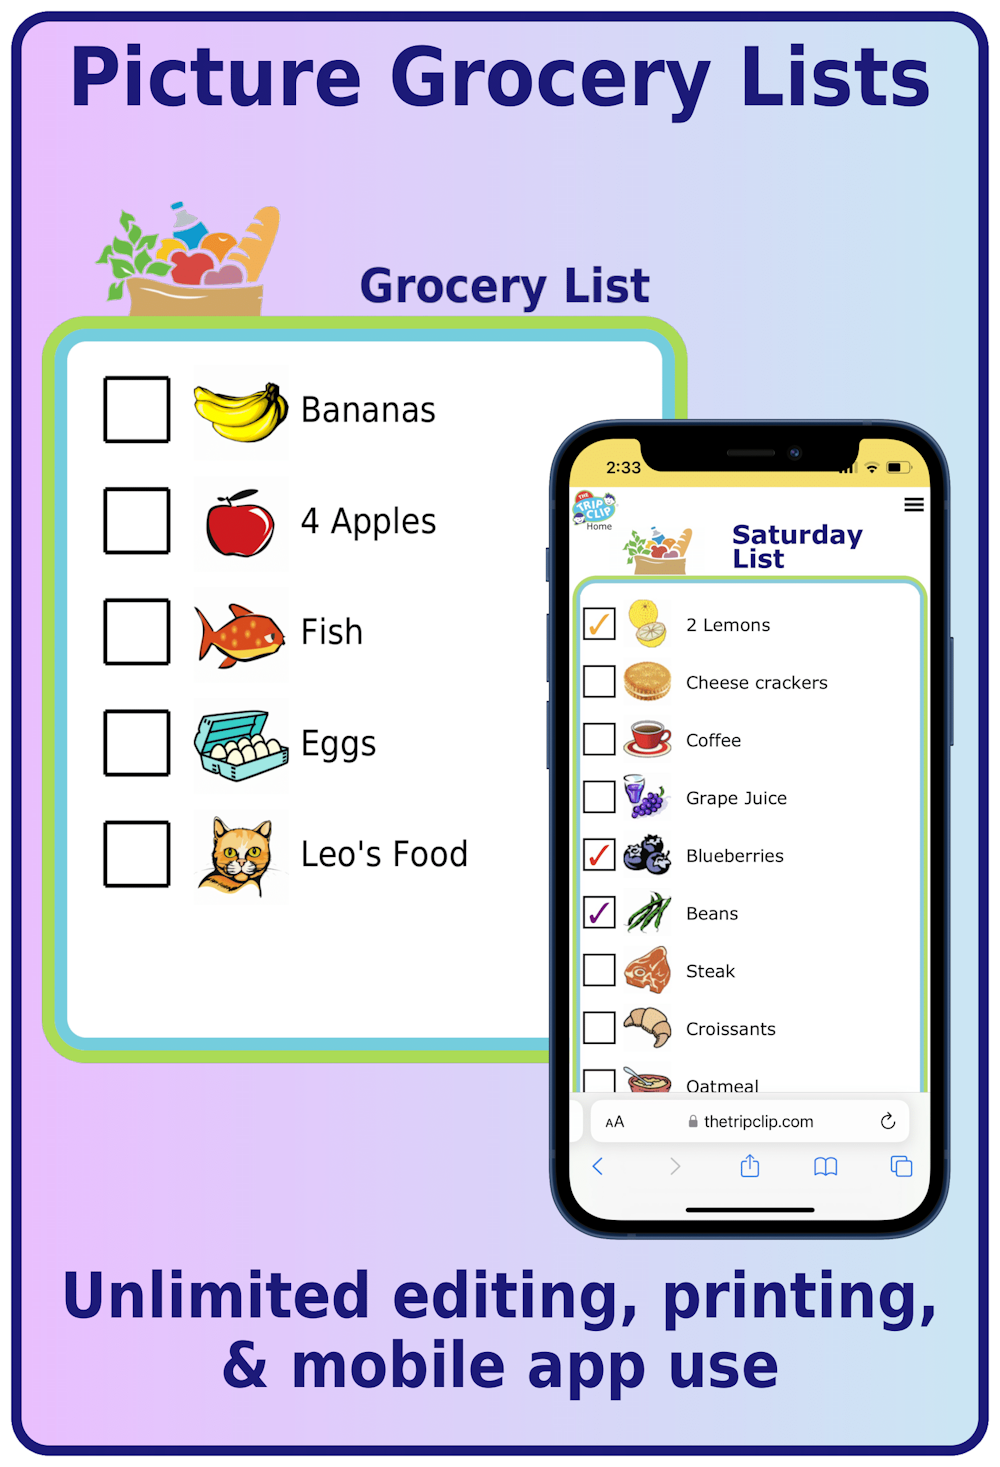 Picture grocery shopping list: bananas, apples, fish, eggs, milk